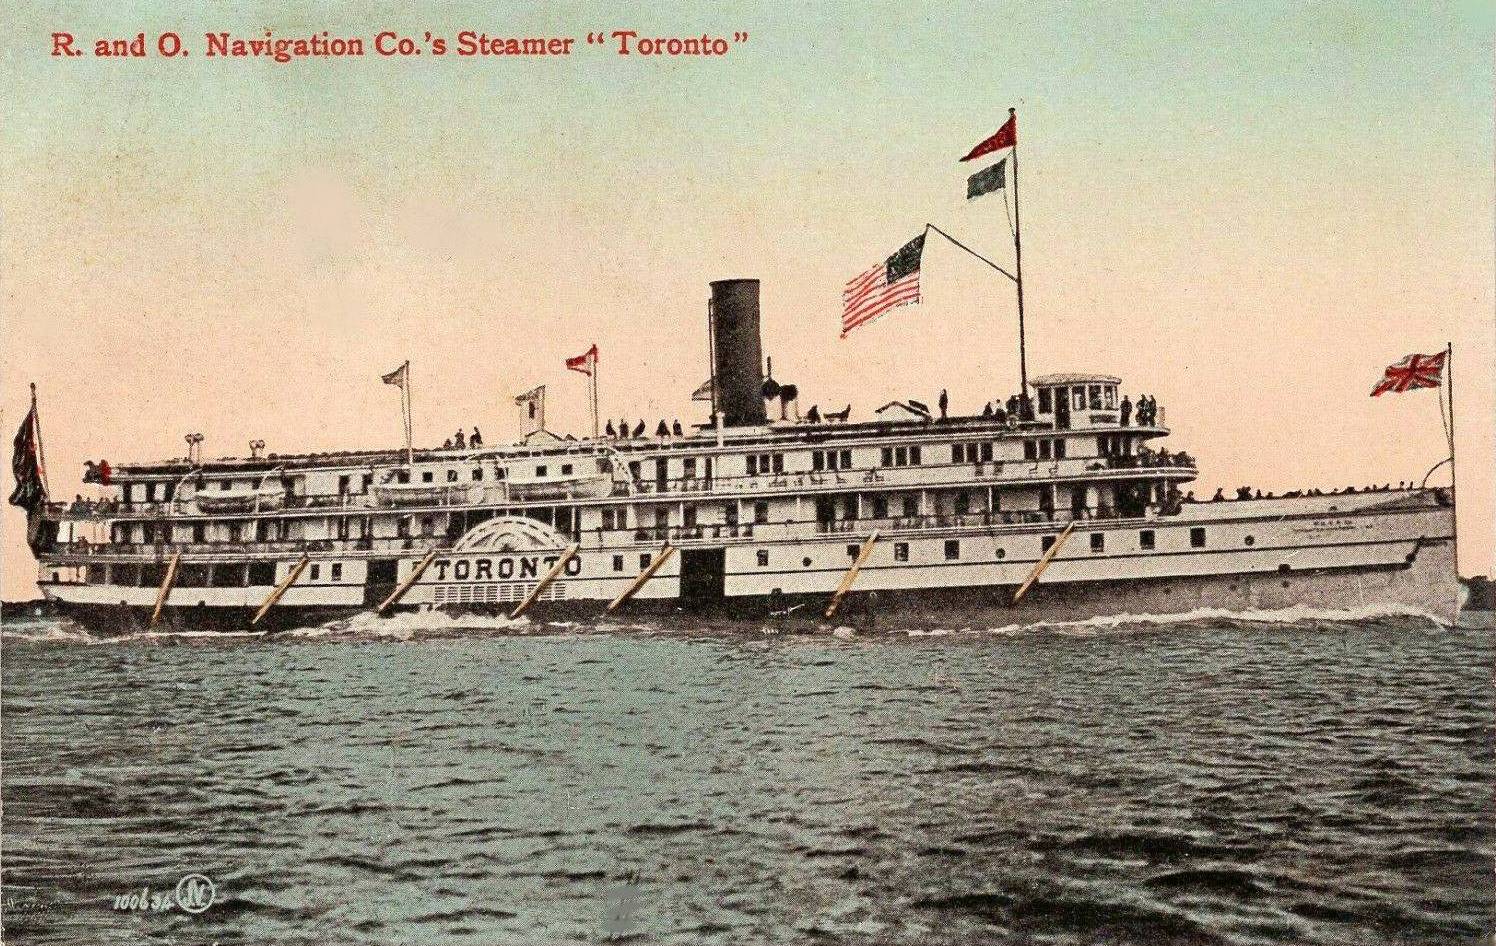 POSTCARD - TORONTO - STEAMER TORONTO OUT ON THE LAKE - R AND O NAVIGATION - PEOPLE ON DECKS - NOTE AMERICAN FLAG ON TOP AND BRITISH FLAG AT FRONT - TINTED - NICE VERSION - 1910s